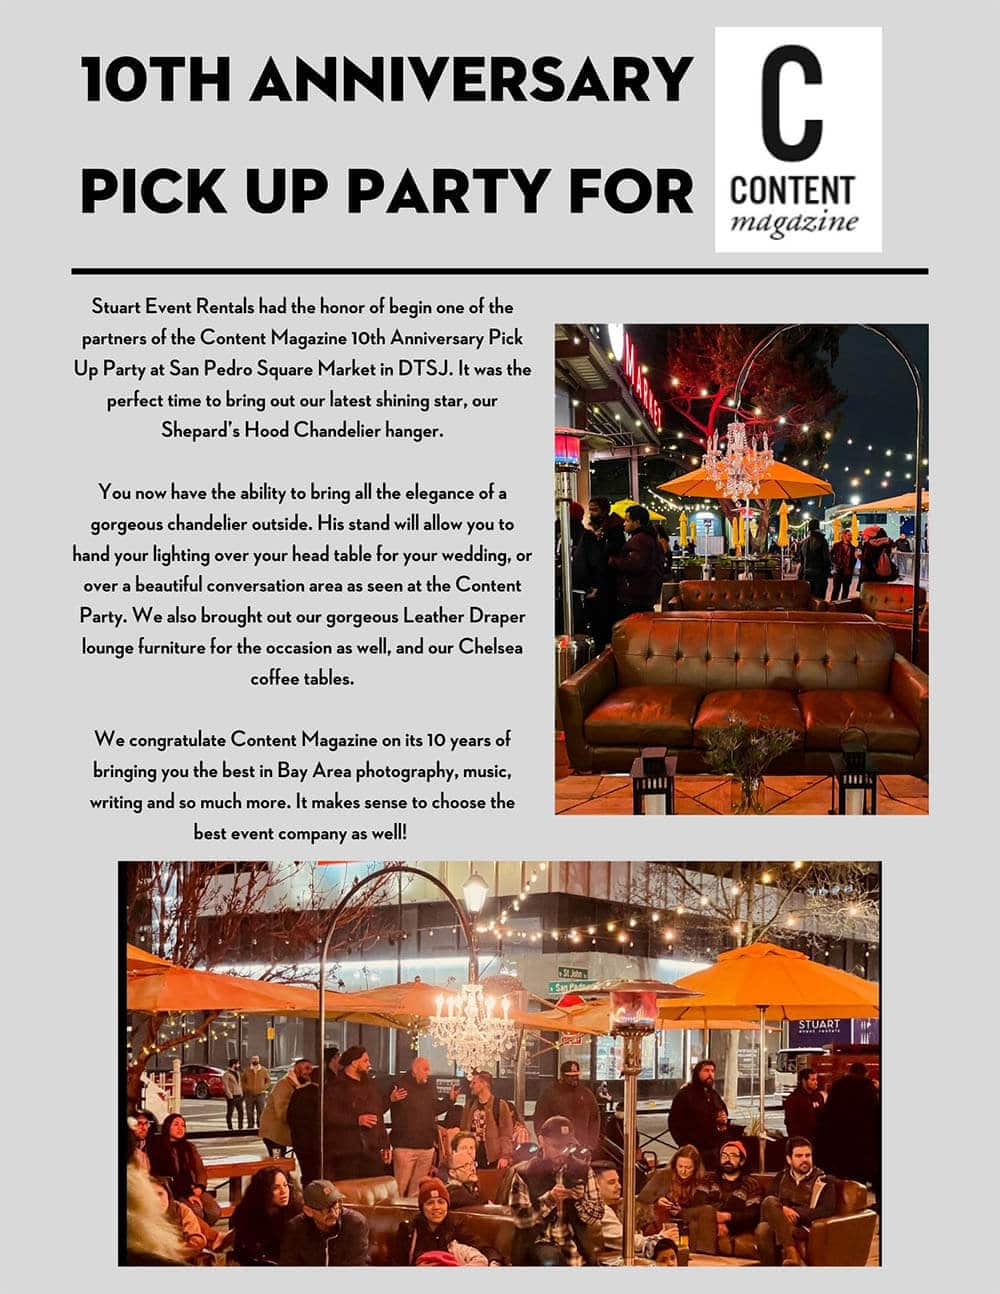 10th anniversary pick up party for content magazine